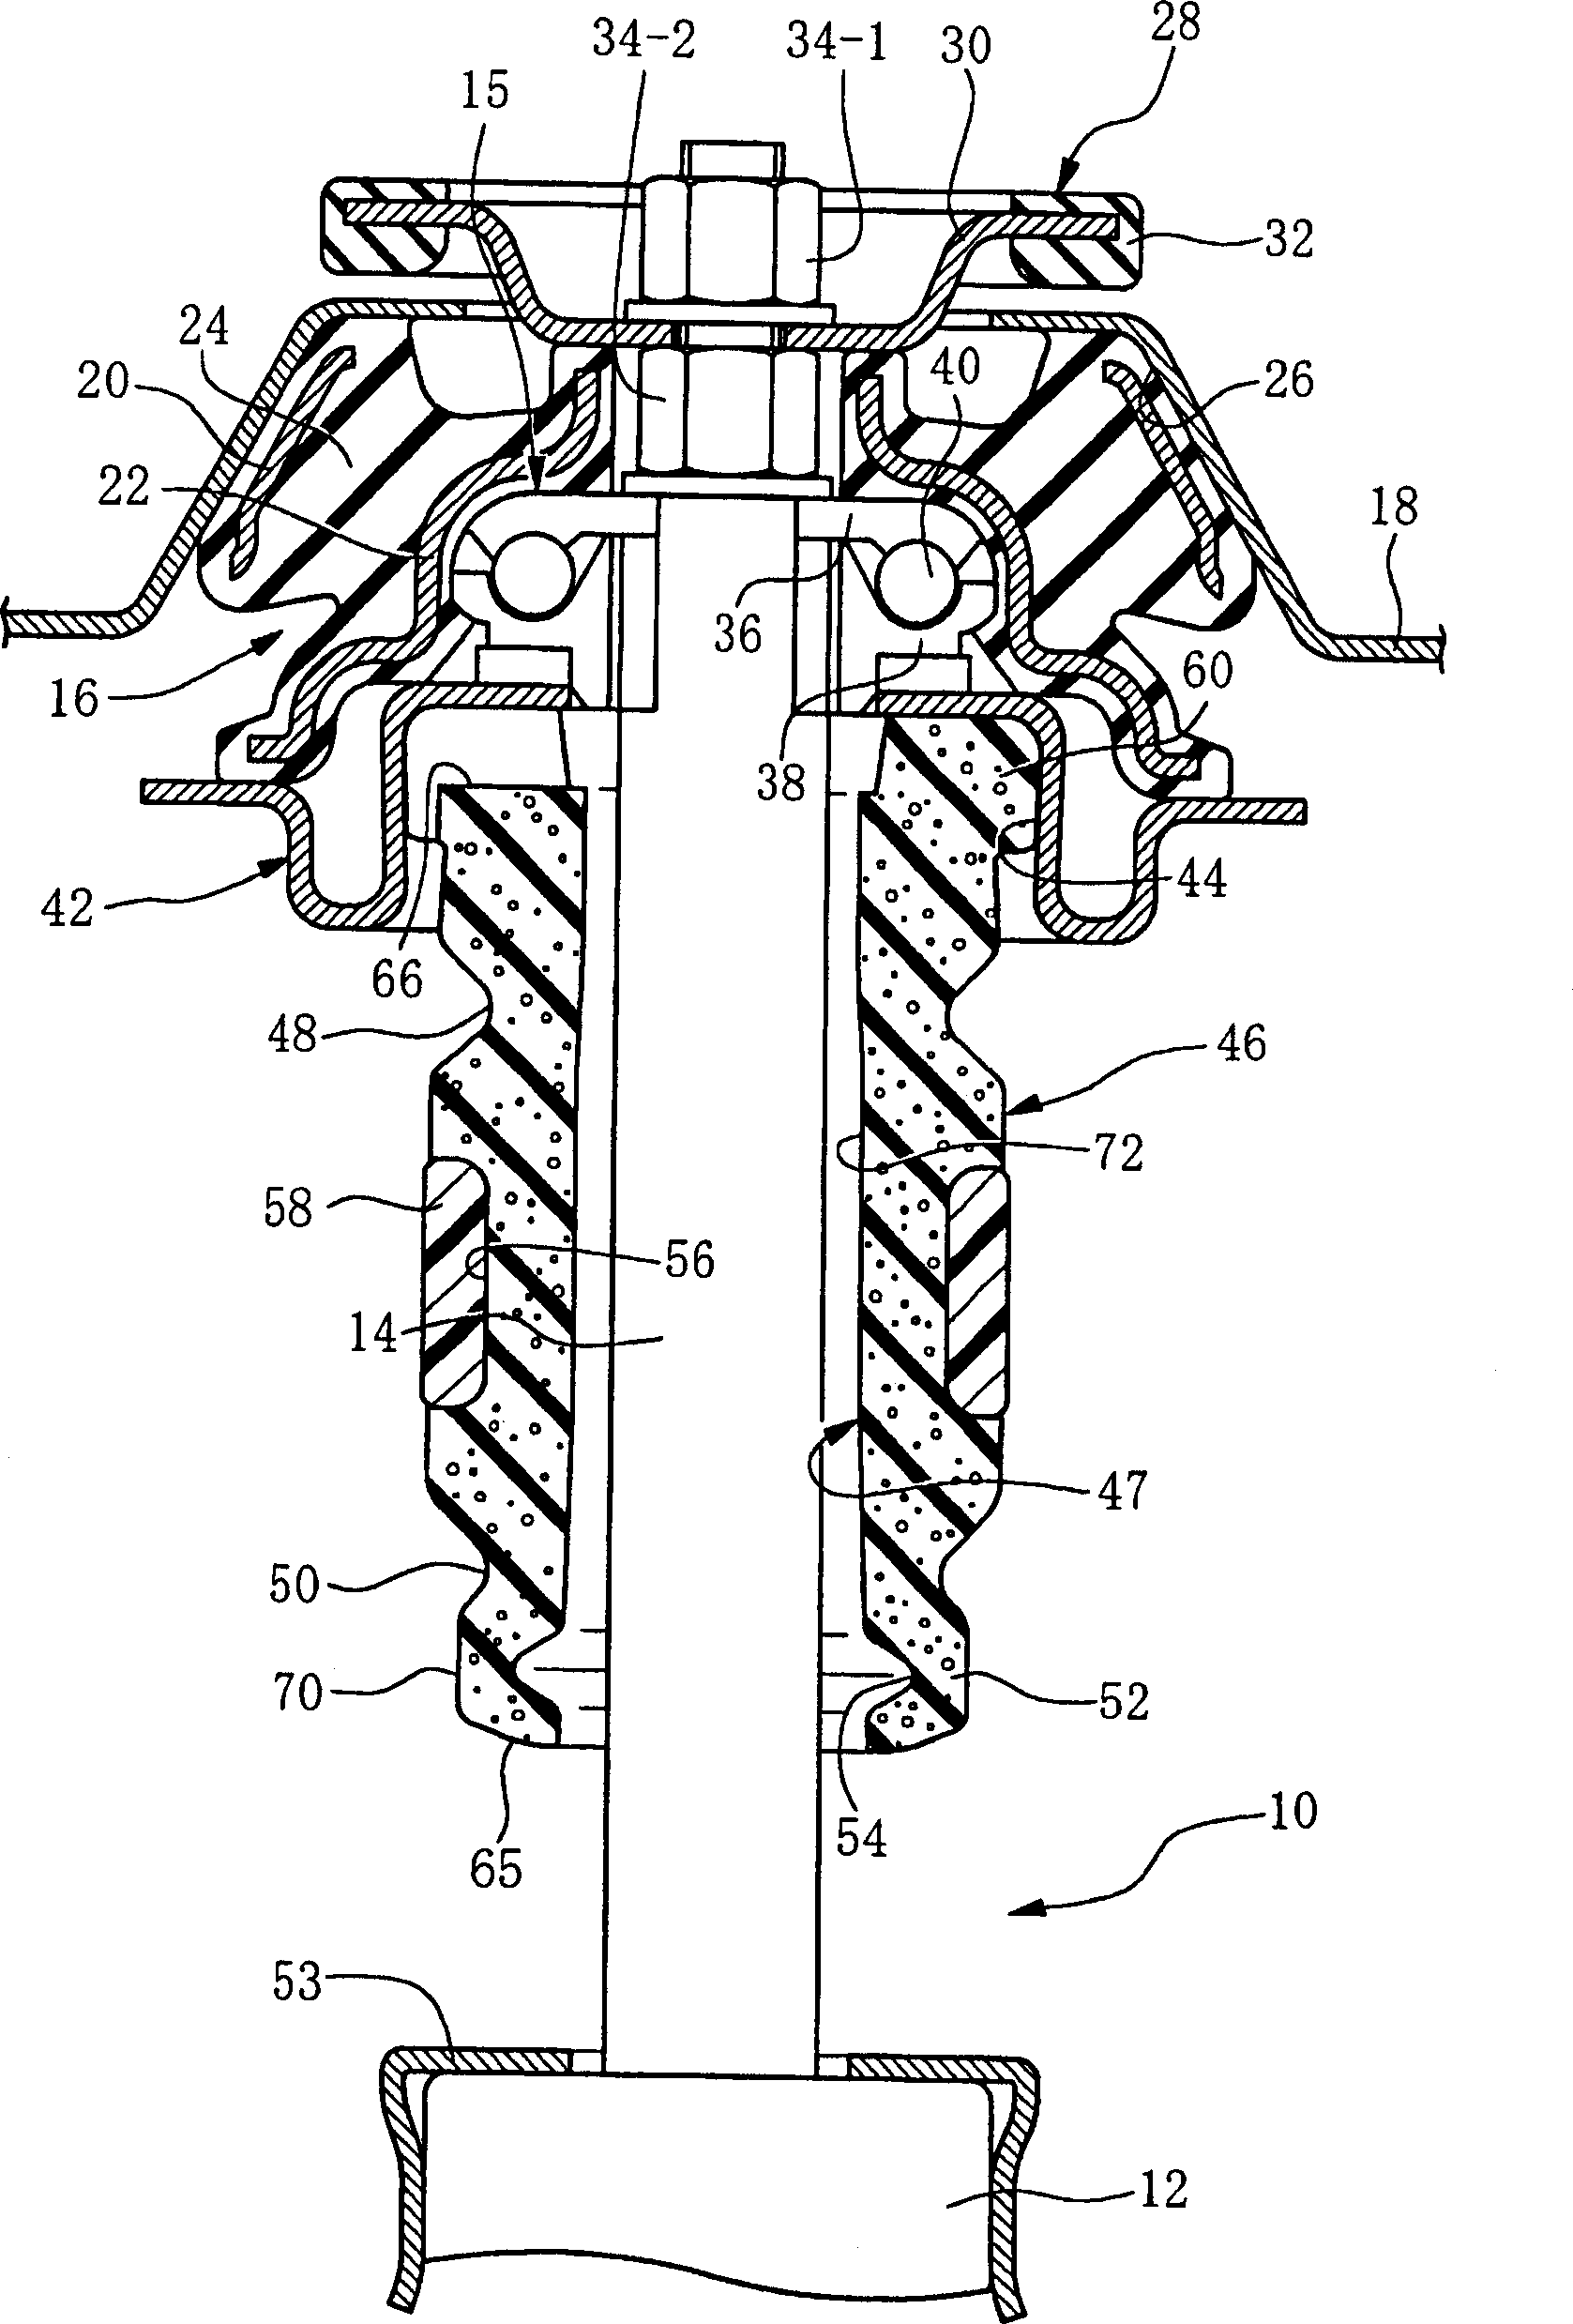 Bounce limiter for hanging apparatus